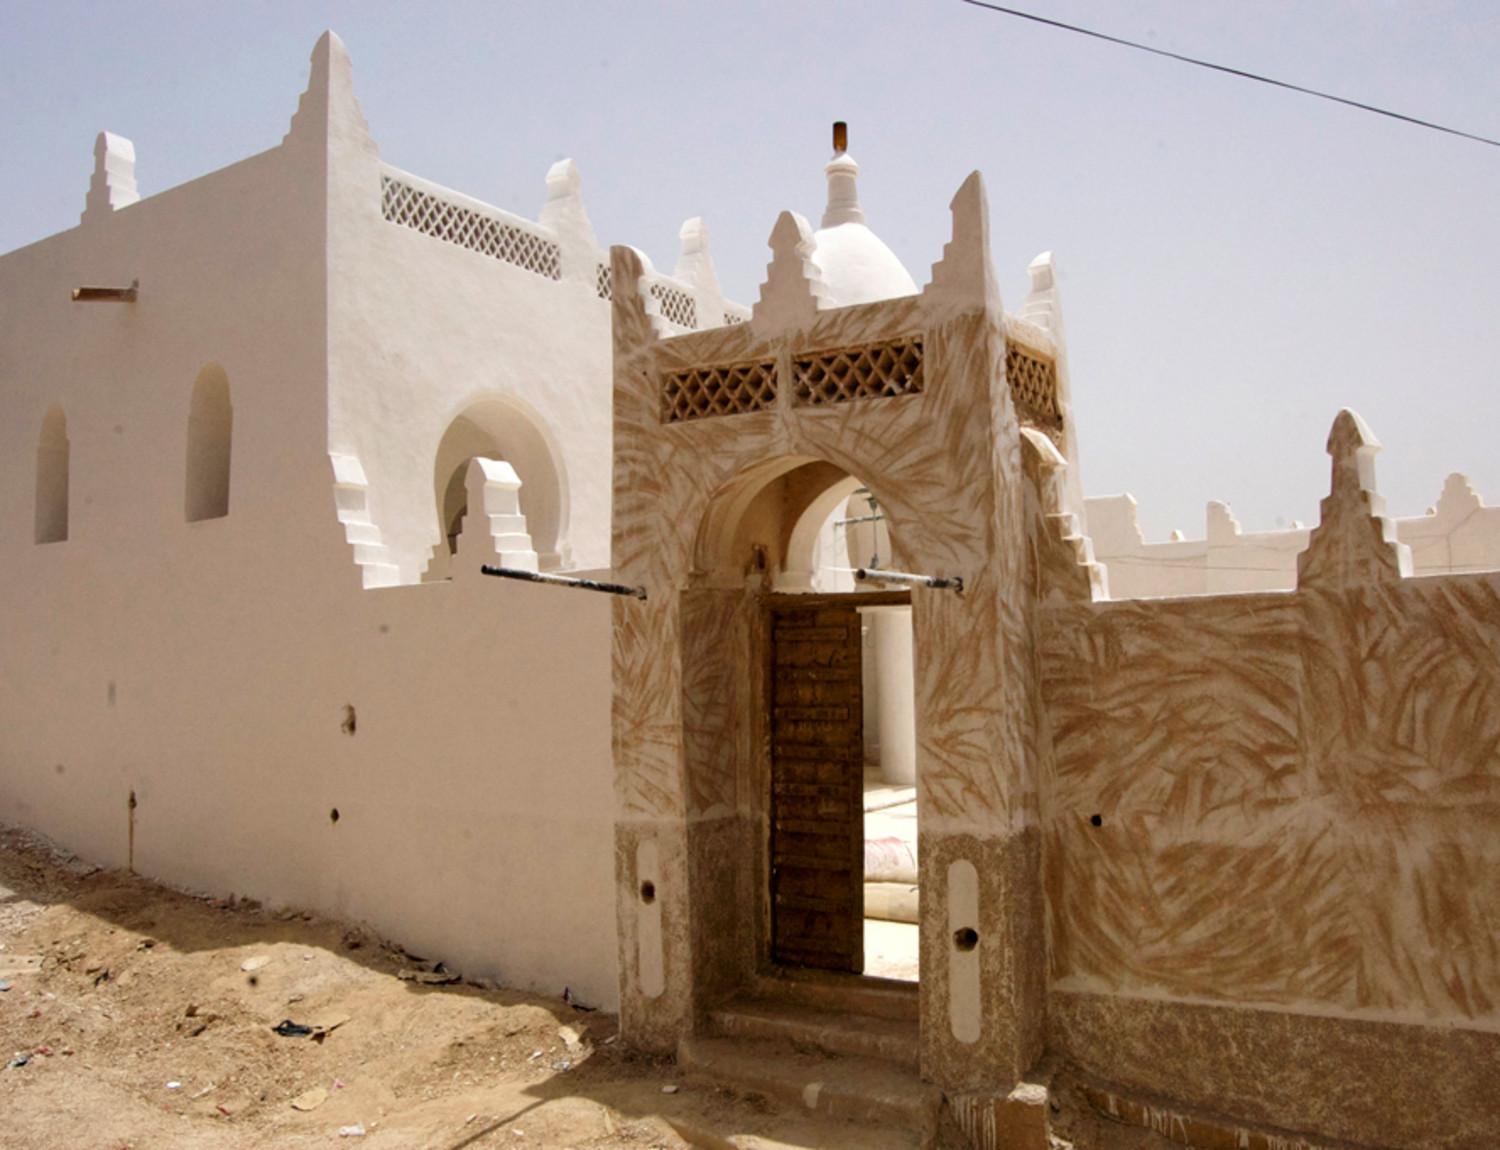 South entrance to Al Faqih mosque under renovation, the prayer hall is to the west (left) already renovated